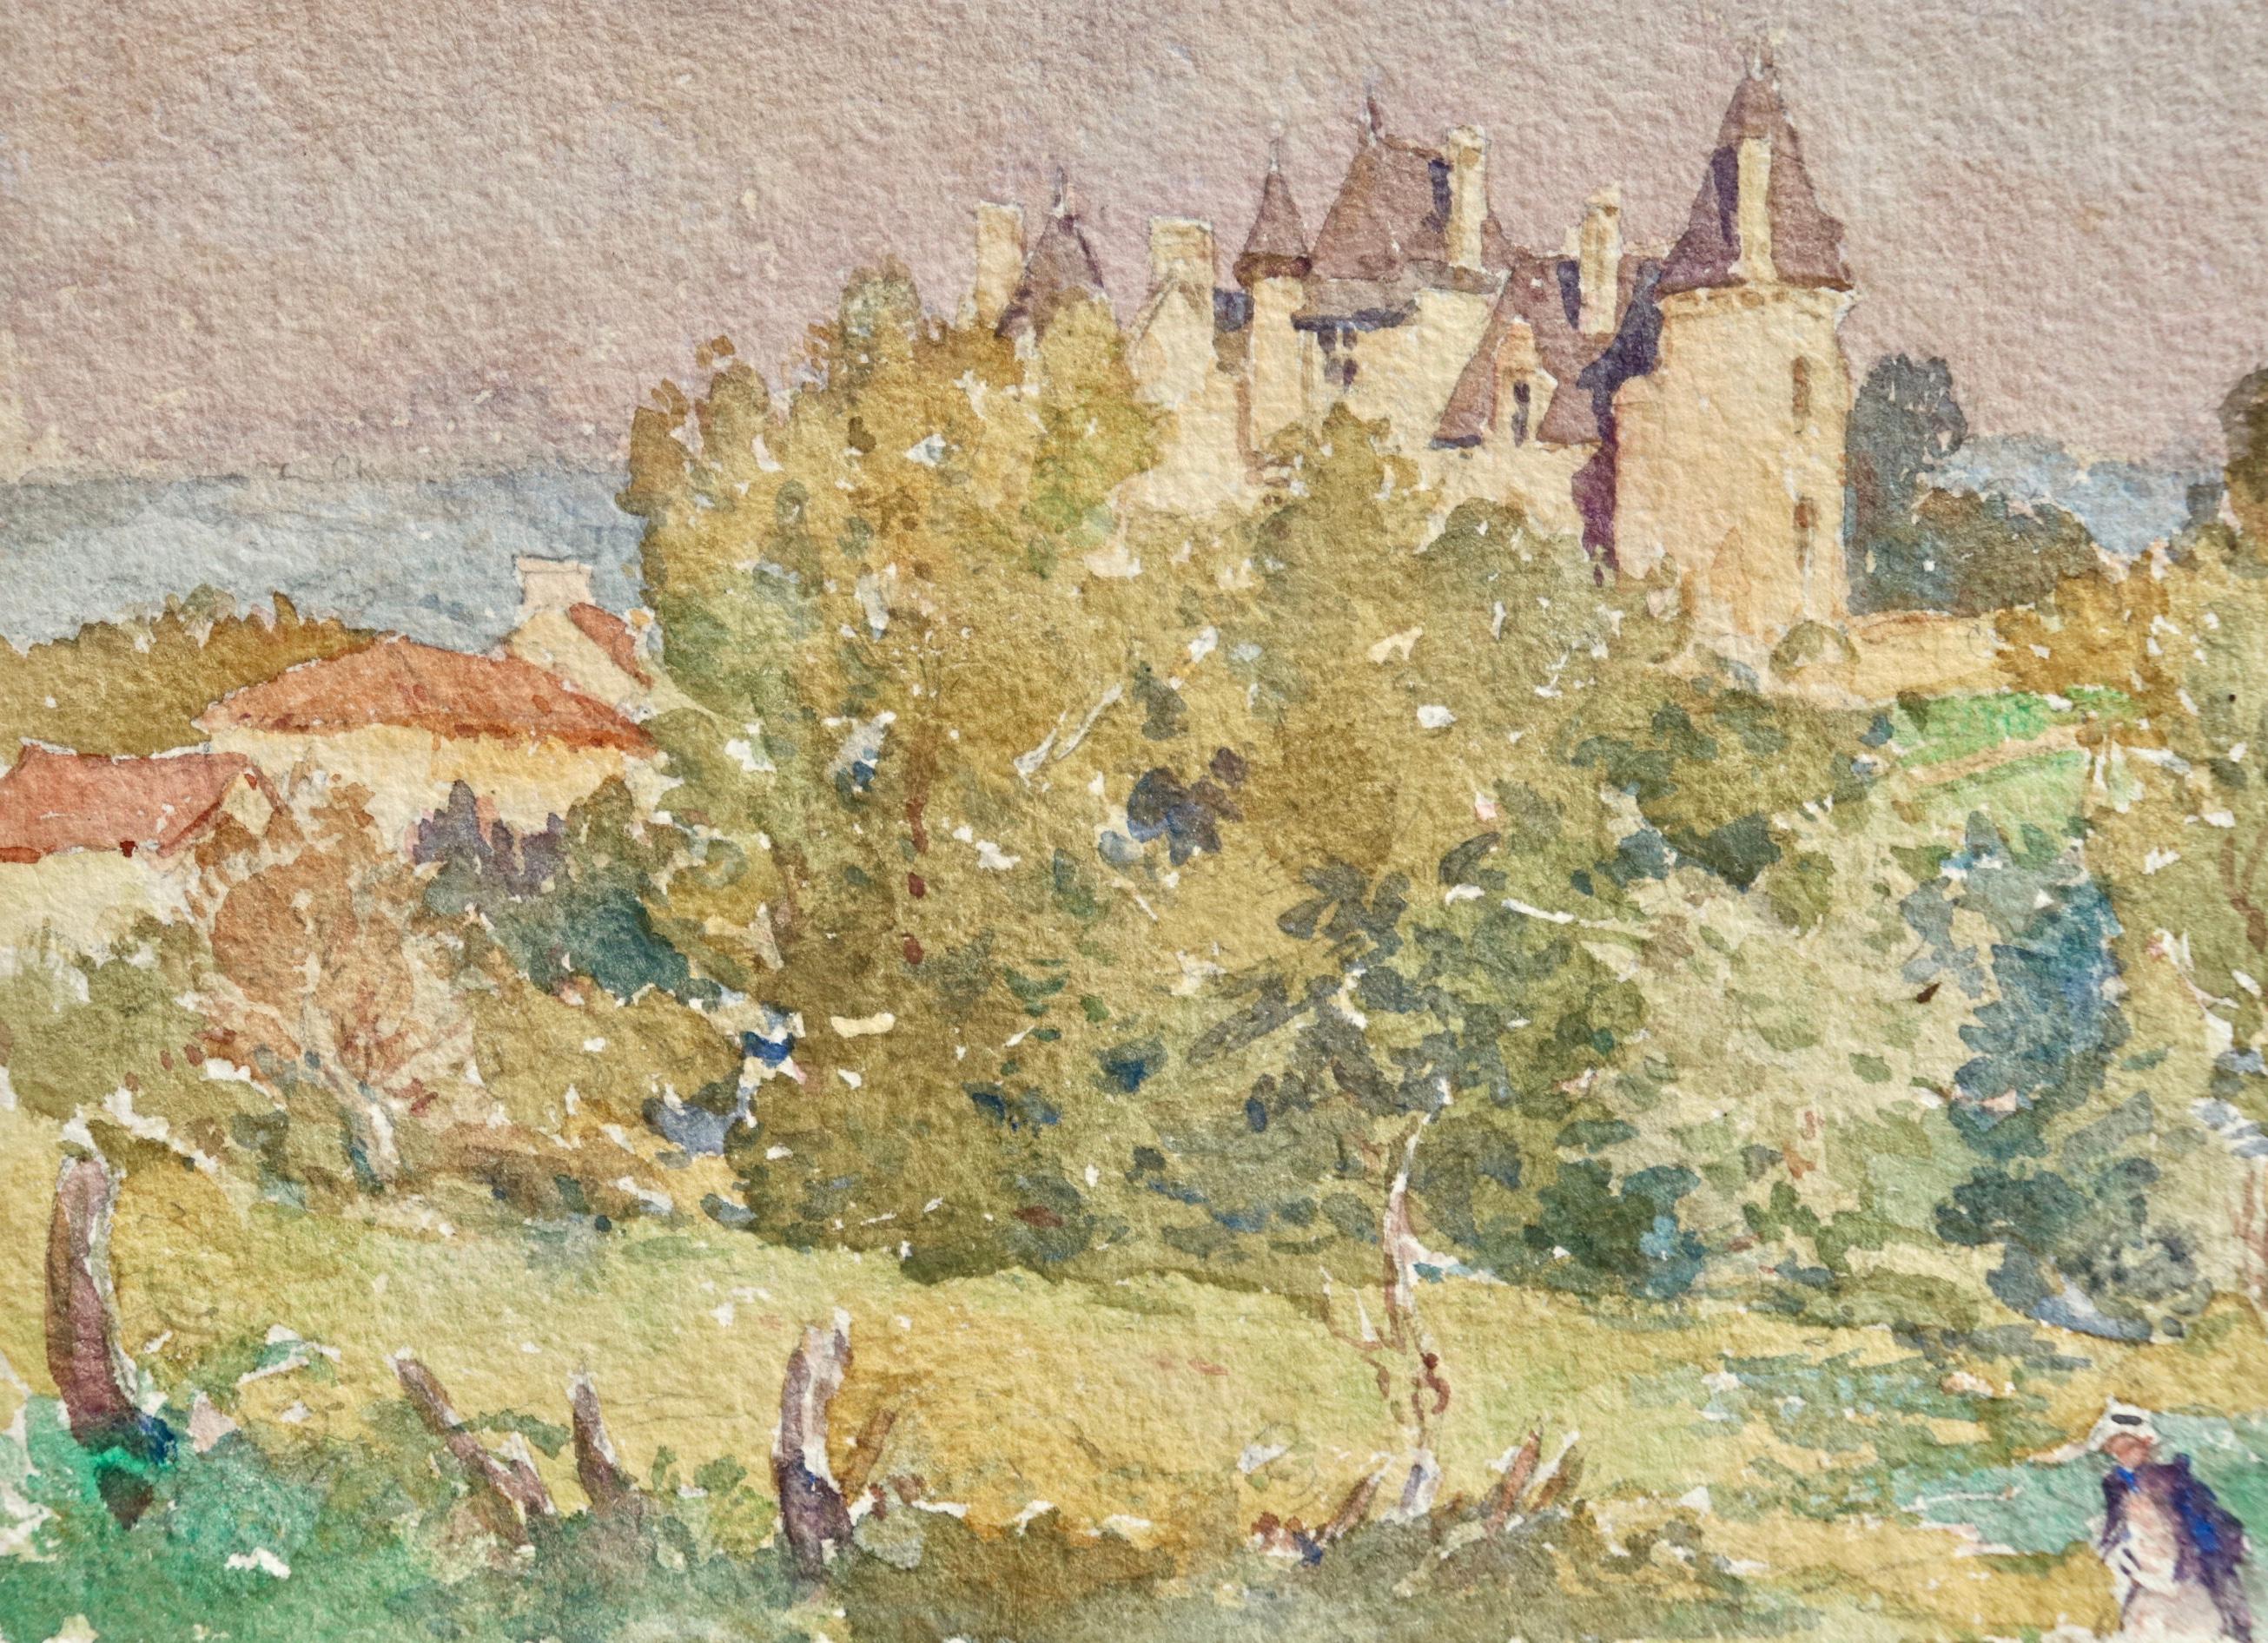 Watercolour on paper circa 1925 by French Impressionist painter Henri Duhem depicting a grand house in a landscape with a lady walking through the field to the foreground and the sea in the distance. Signed lower right. This piece is not currently